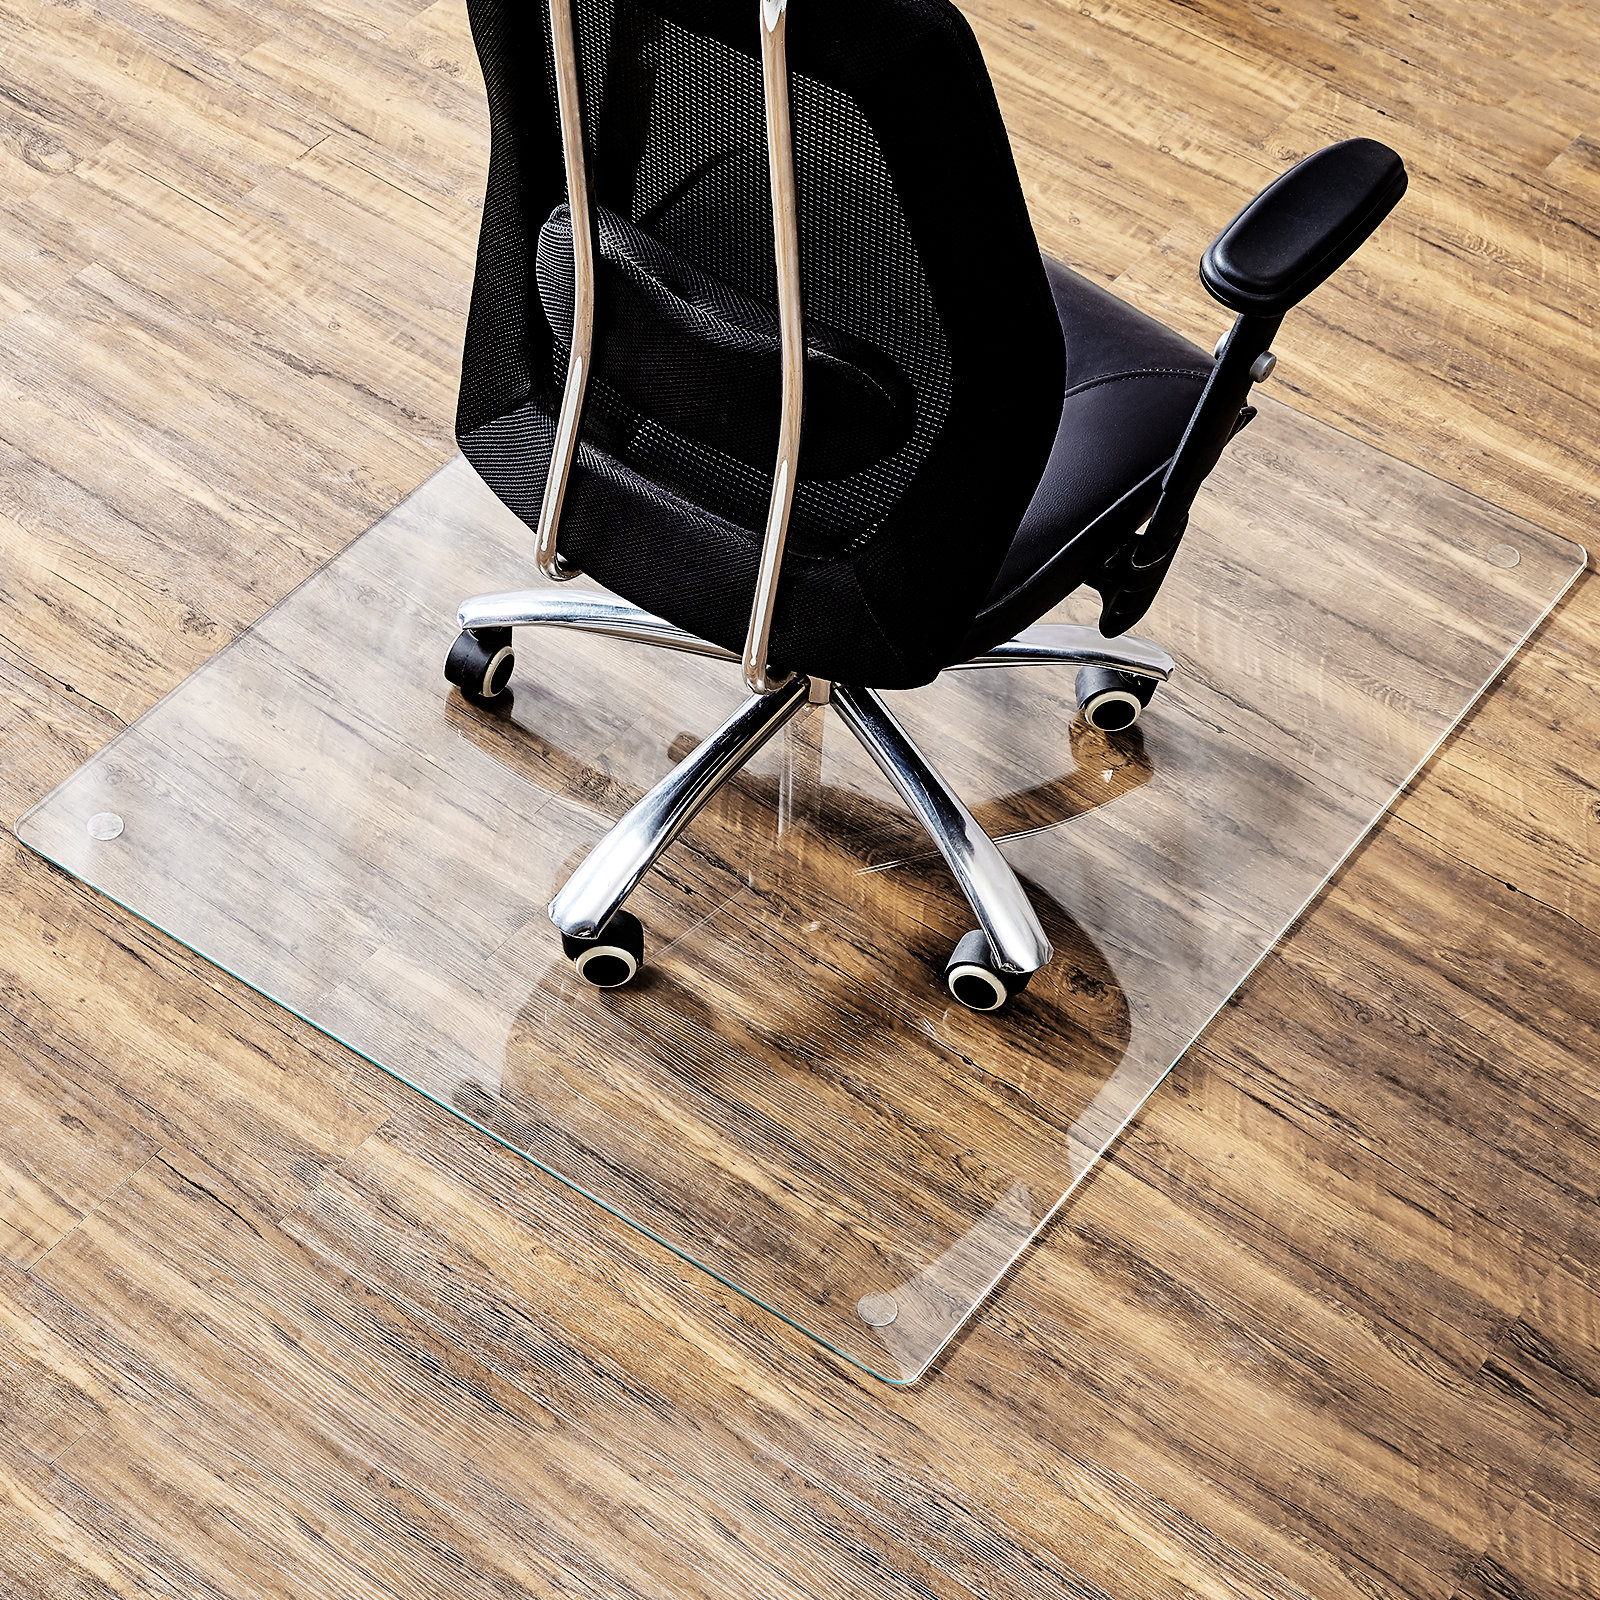 RUGged Chair Mats are Woven Fabric Surface Desk Chair Mats by